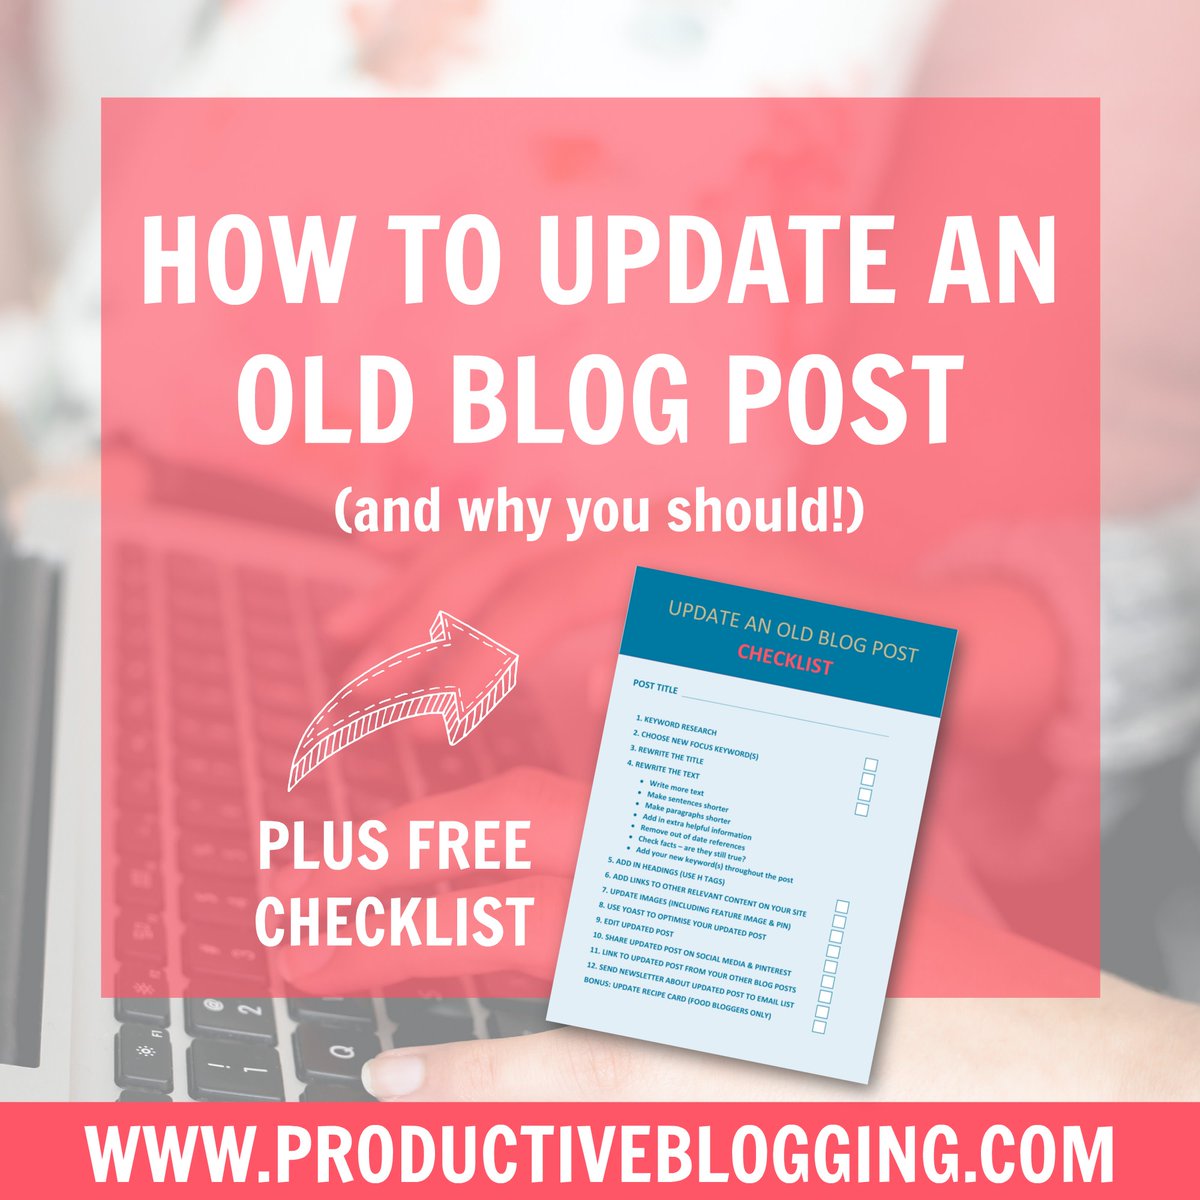 If you've been blogging for a while, the chances are you have some blog posts that are out of date / poorly written / too short / terrible photos etc.

The problem is that old content is holding back your blog growth >>> bit.ly/2ZP0tIr

#SEO #SEOtips #bloggingtips